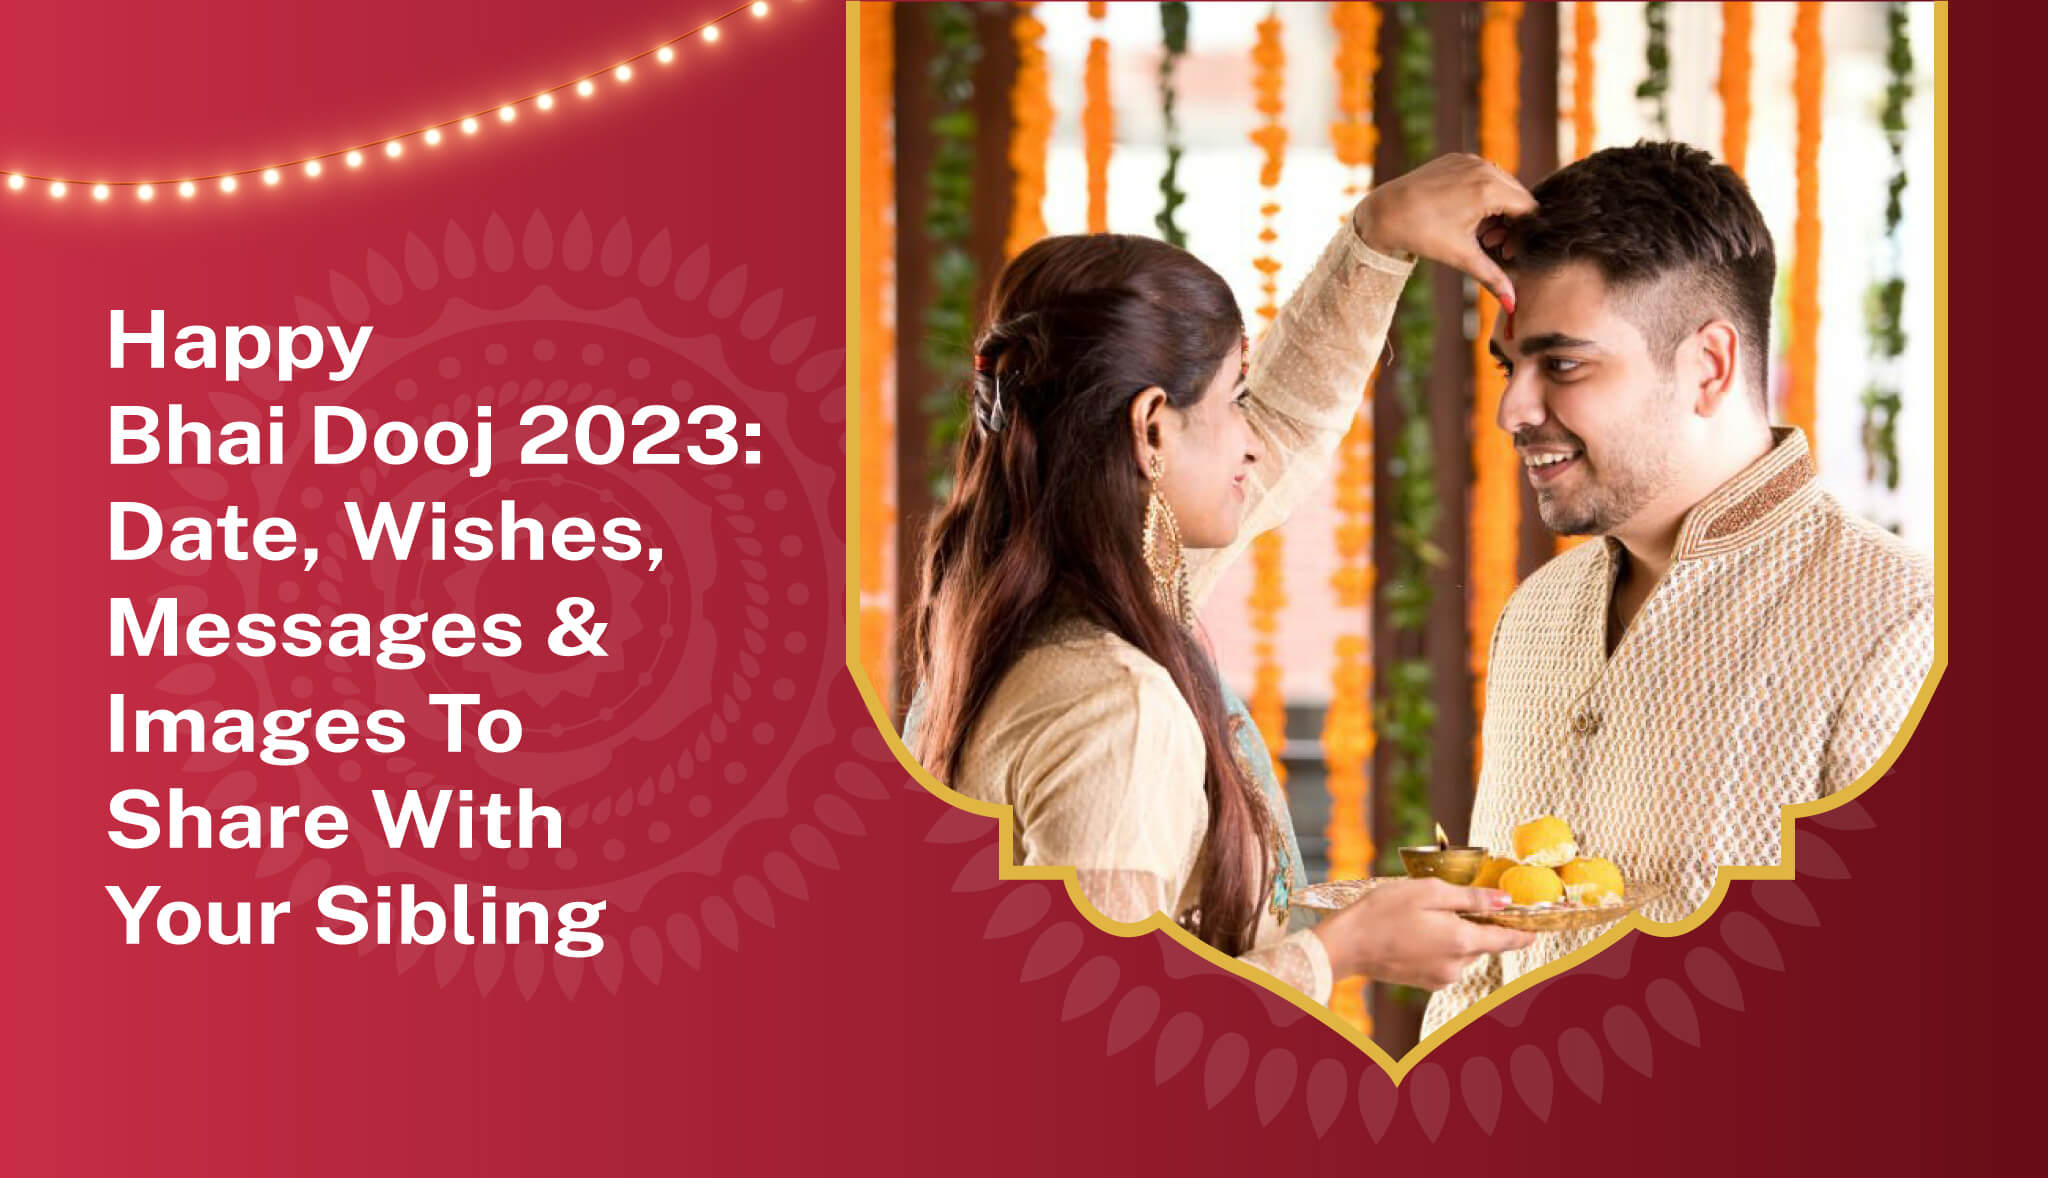 Unique greetings and creative images to wish Bhai Dooj 2023 - Post it